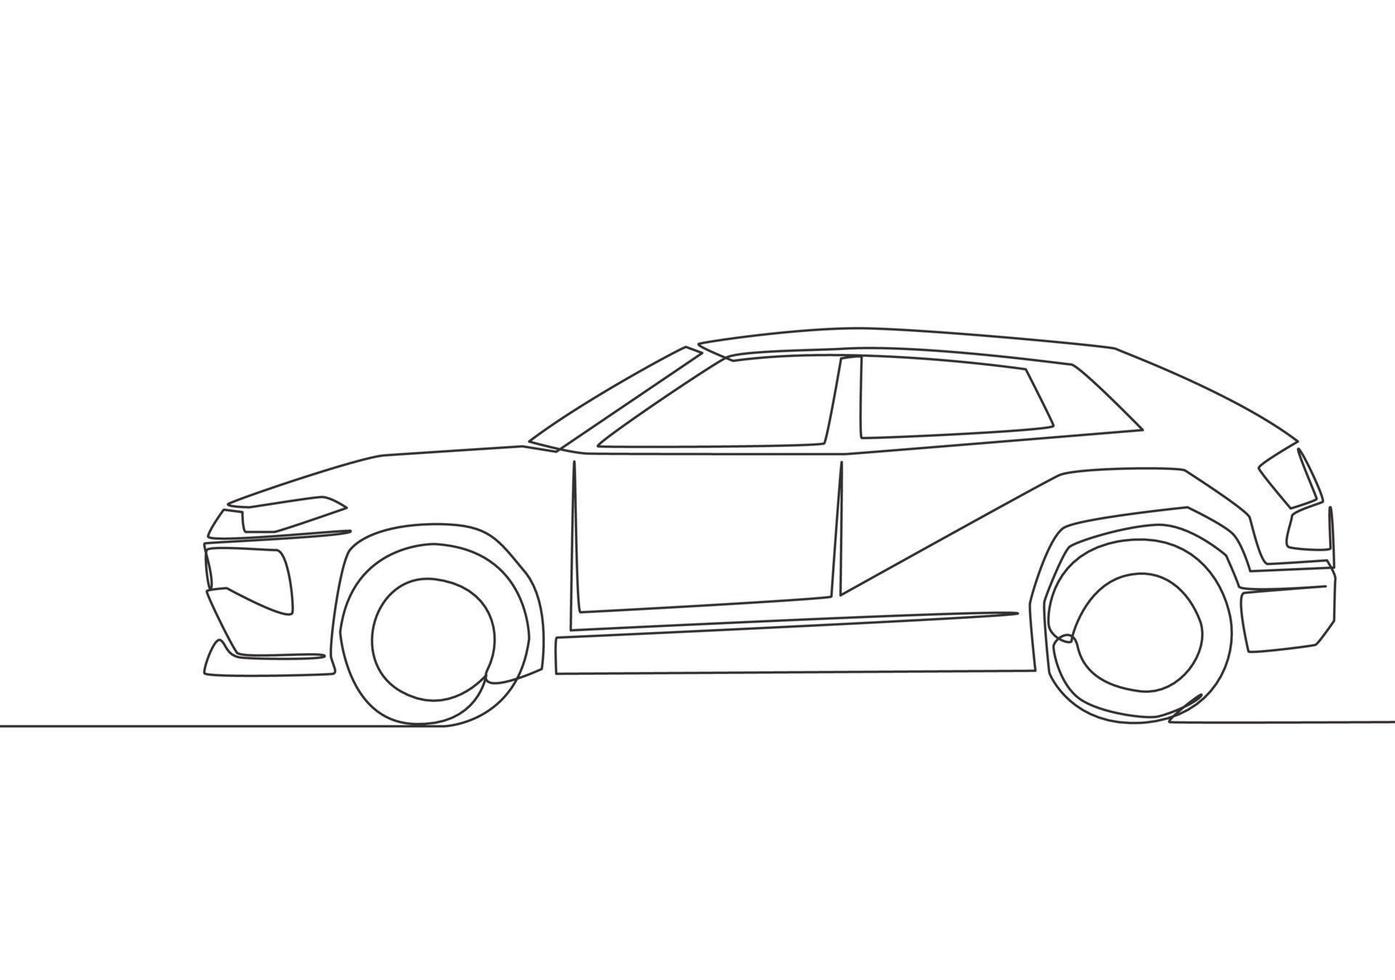 Continuous line drawing of tough suv car. Urban city vehicle transportation concept. One single continuous line draw design vector